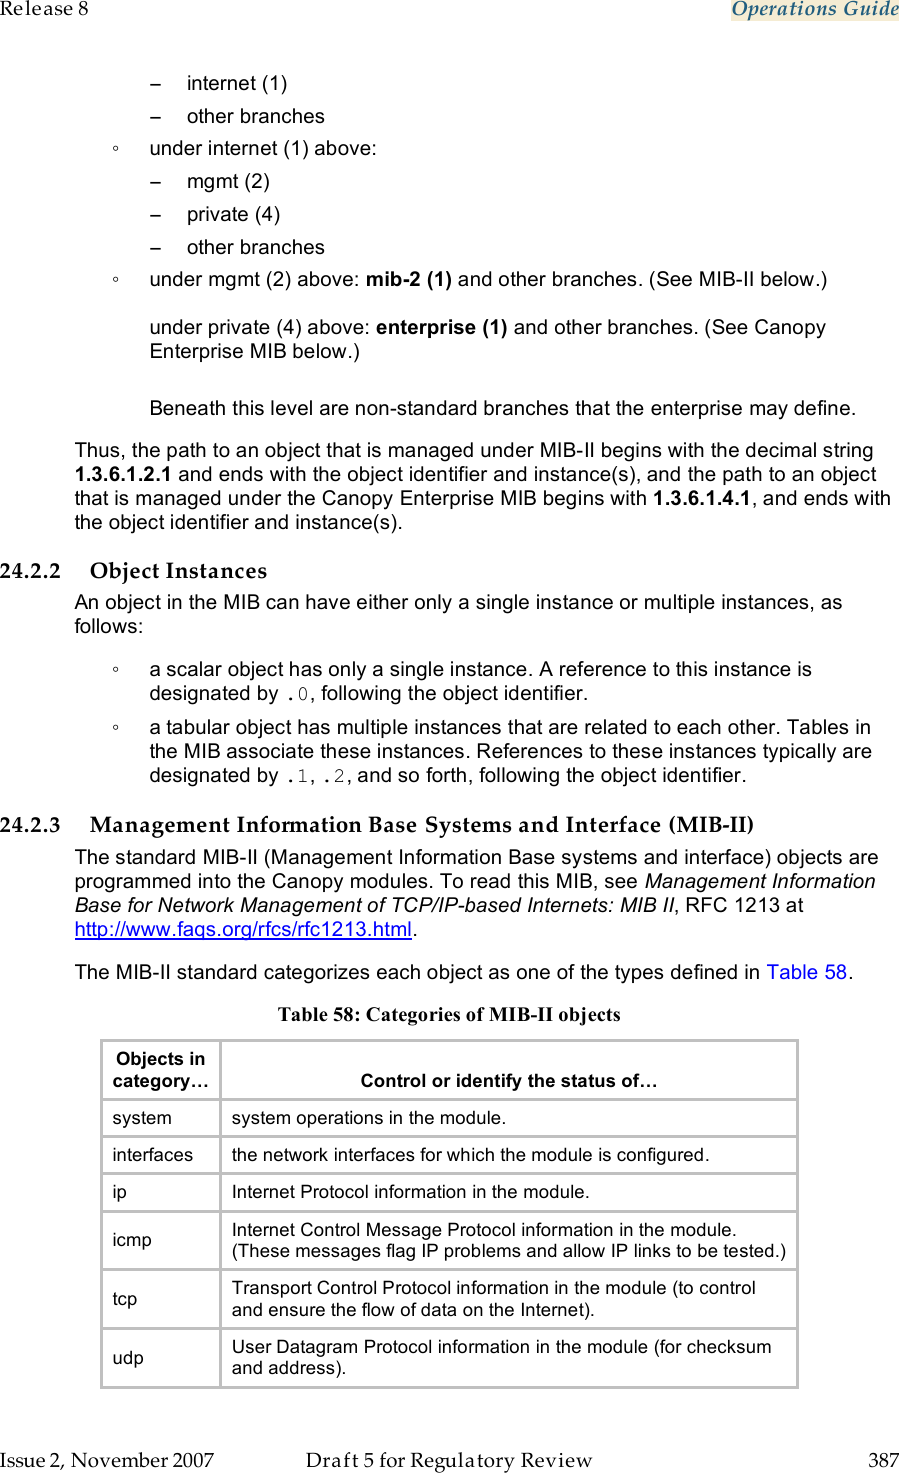 Release 8    Operations Guide   Issue 2, November 2007  Draft 5 for Regulatory Review  387     −  internet (1) −  other branches ◦  under internet (1) above: −  mgmt (2) −  private (4) −  other branches ◦  under mgmt (2) above: mib-2 (1) and other branches. (See MIB-II below.)  under private (4) above: enterprise (1) and other branches. (See Canopy Enterprise MIB below.)  Beneath this level are non-standard branches that the enterprise may define. Thus, the path to an object that is managed under MIB-II begins with the decimal string 1.3.6.1.2.1 and ends with the object identifier and instance(s), and the path to an object that is managed under the Canopy Enterprise MIB begins with 1.3.6.1.4.1, and ends with the object identifier and instance(s). 24.2.2 Object Instances An object in the MIB can have either only a single instance or multiple instances, as follows: ◦  a scalar object has only a single instance. A reference to this instance is designated by .0, following the object identifier. ◦  a tabular object has multiple instances that are related to each other. Tables in the MIB associate these instances. References to these instances typically are designated by .1, .2, and so forth, following the object identifier. 24.2.3 Management Information Base Systems and Interface (MIB-II) The standard MIB-II (Management Information Base systems and interface) objects are programmed into the Canopy modules. To read this MIB, see Management Information Base for Network Management of TCP/IP-based Internets: MIB II, RFC 1213 at http://www.faqs.org/rfcs/rfc1213.html. The MIB-II standard categorizes each object as one of the types defined in Table 58. Table 58: Categories of MIB-II objects Objects in category…  Control or identify the status of… system system operations in the module. interfaces the network interfaces for which the module is configured. ip Internet Protocol information in the module. icmp Internet Control Message Protocol information in the module. (These messages flag IP problems and allow IP links to be tested.) tcp Transport Control Protocol information in the module (to control and ensure the flow of data on the Internet). udp User Datagram Protocol information in the module (for checksum and address). 